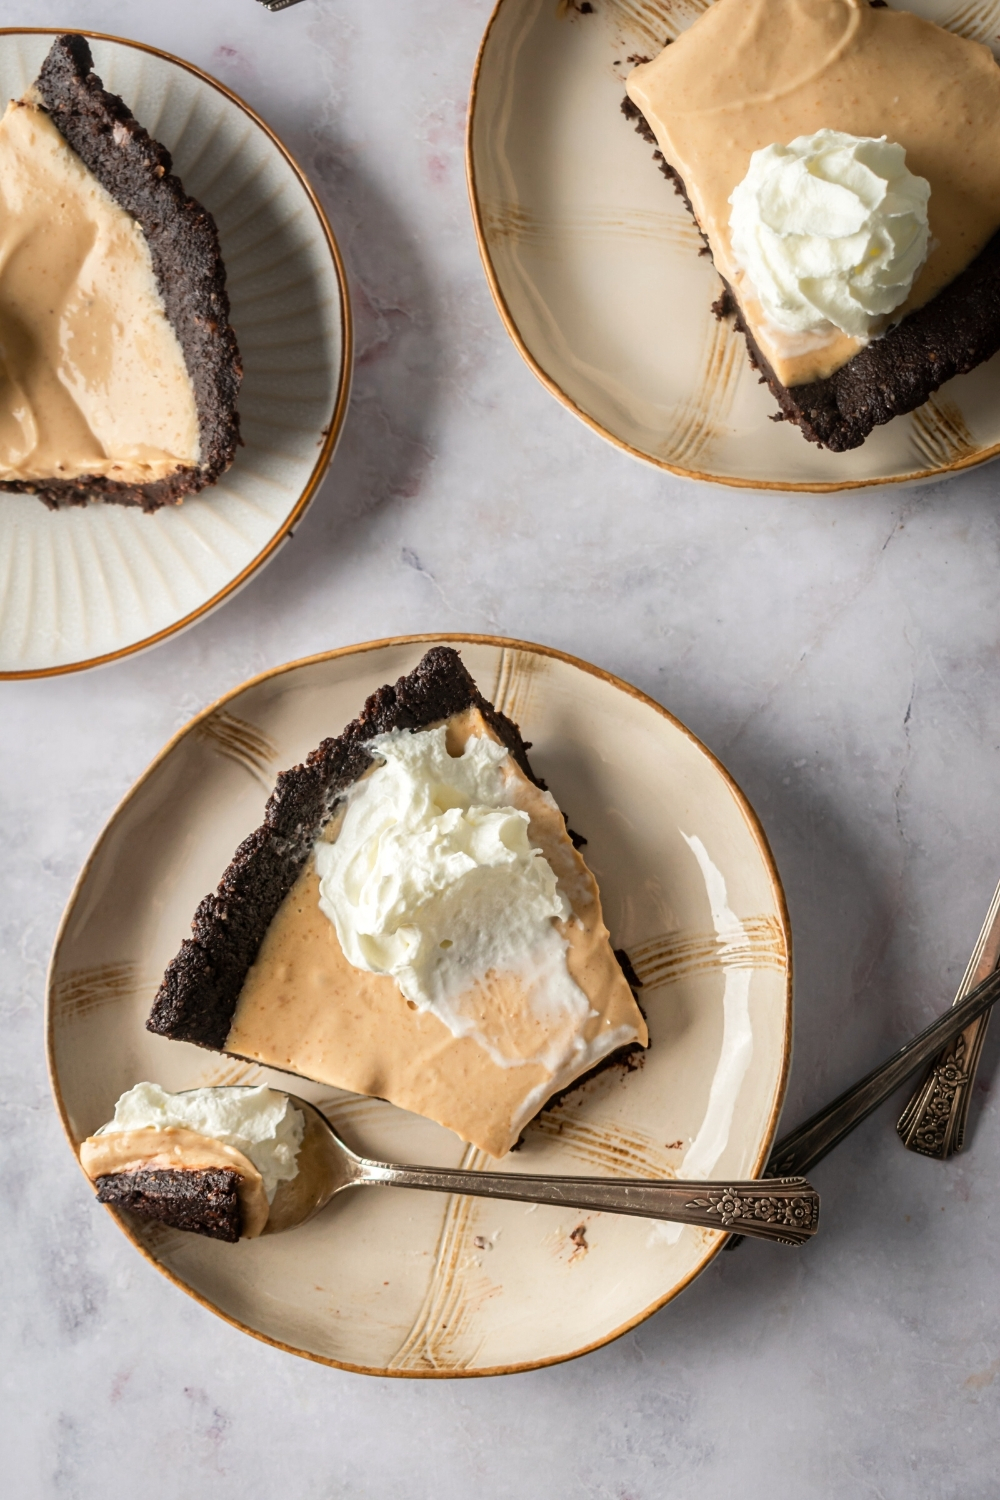 A plate with a slice of chocolate peanut butter pie on it with a piece missing from the front that is on a spoon next to the pie on the plate. Behind that is part of two more plates with part of peanut butter chocolate pie slices on it.